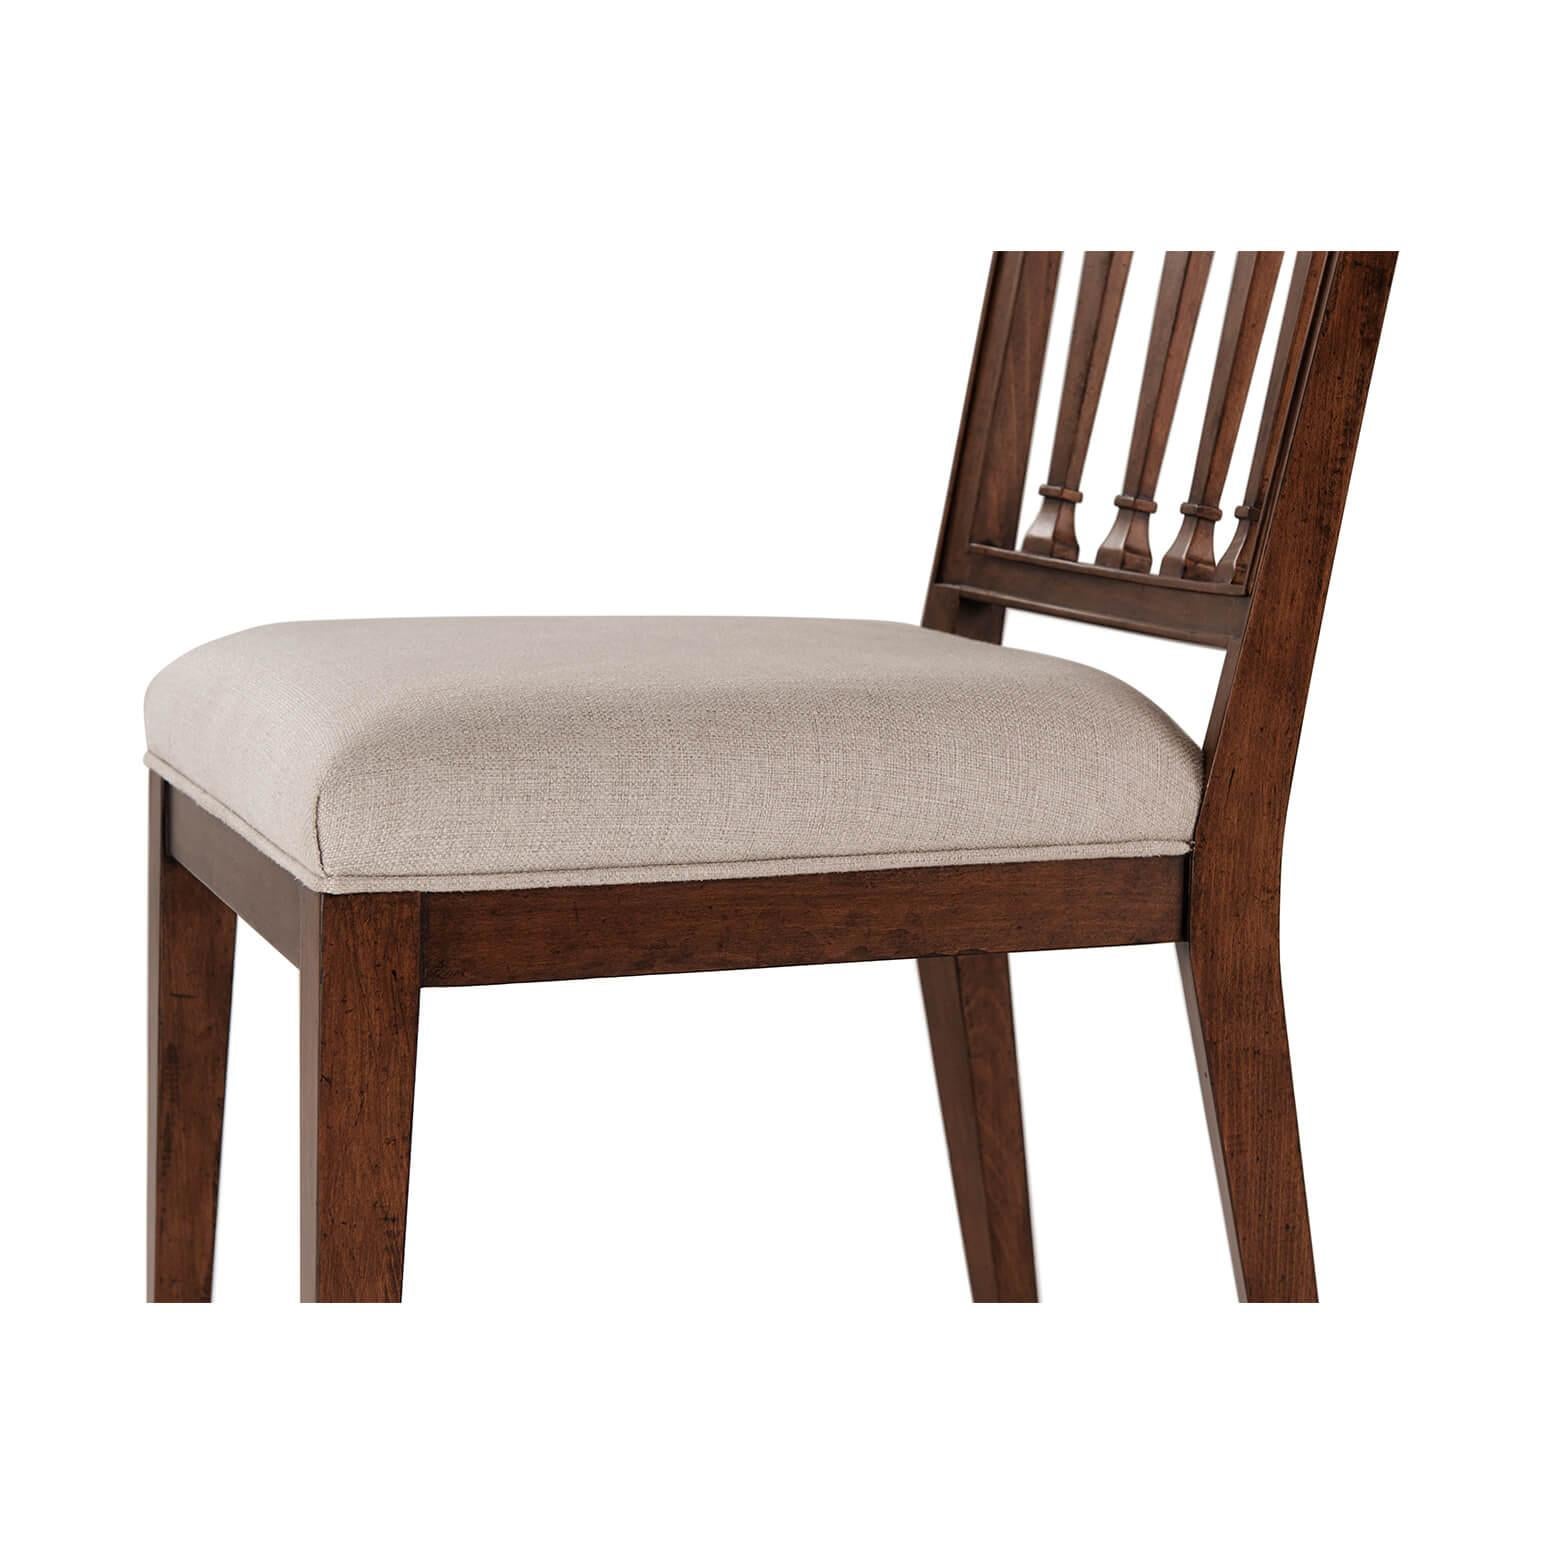 Classic English Dining Chairs For Sale 2